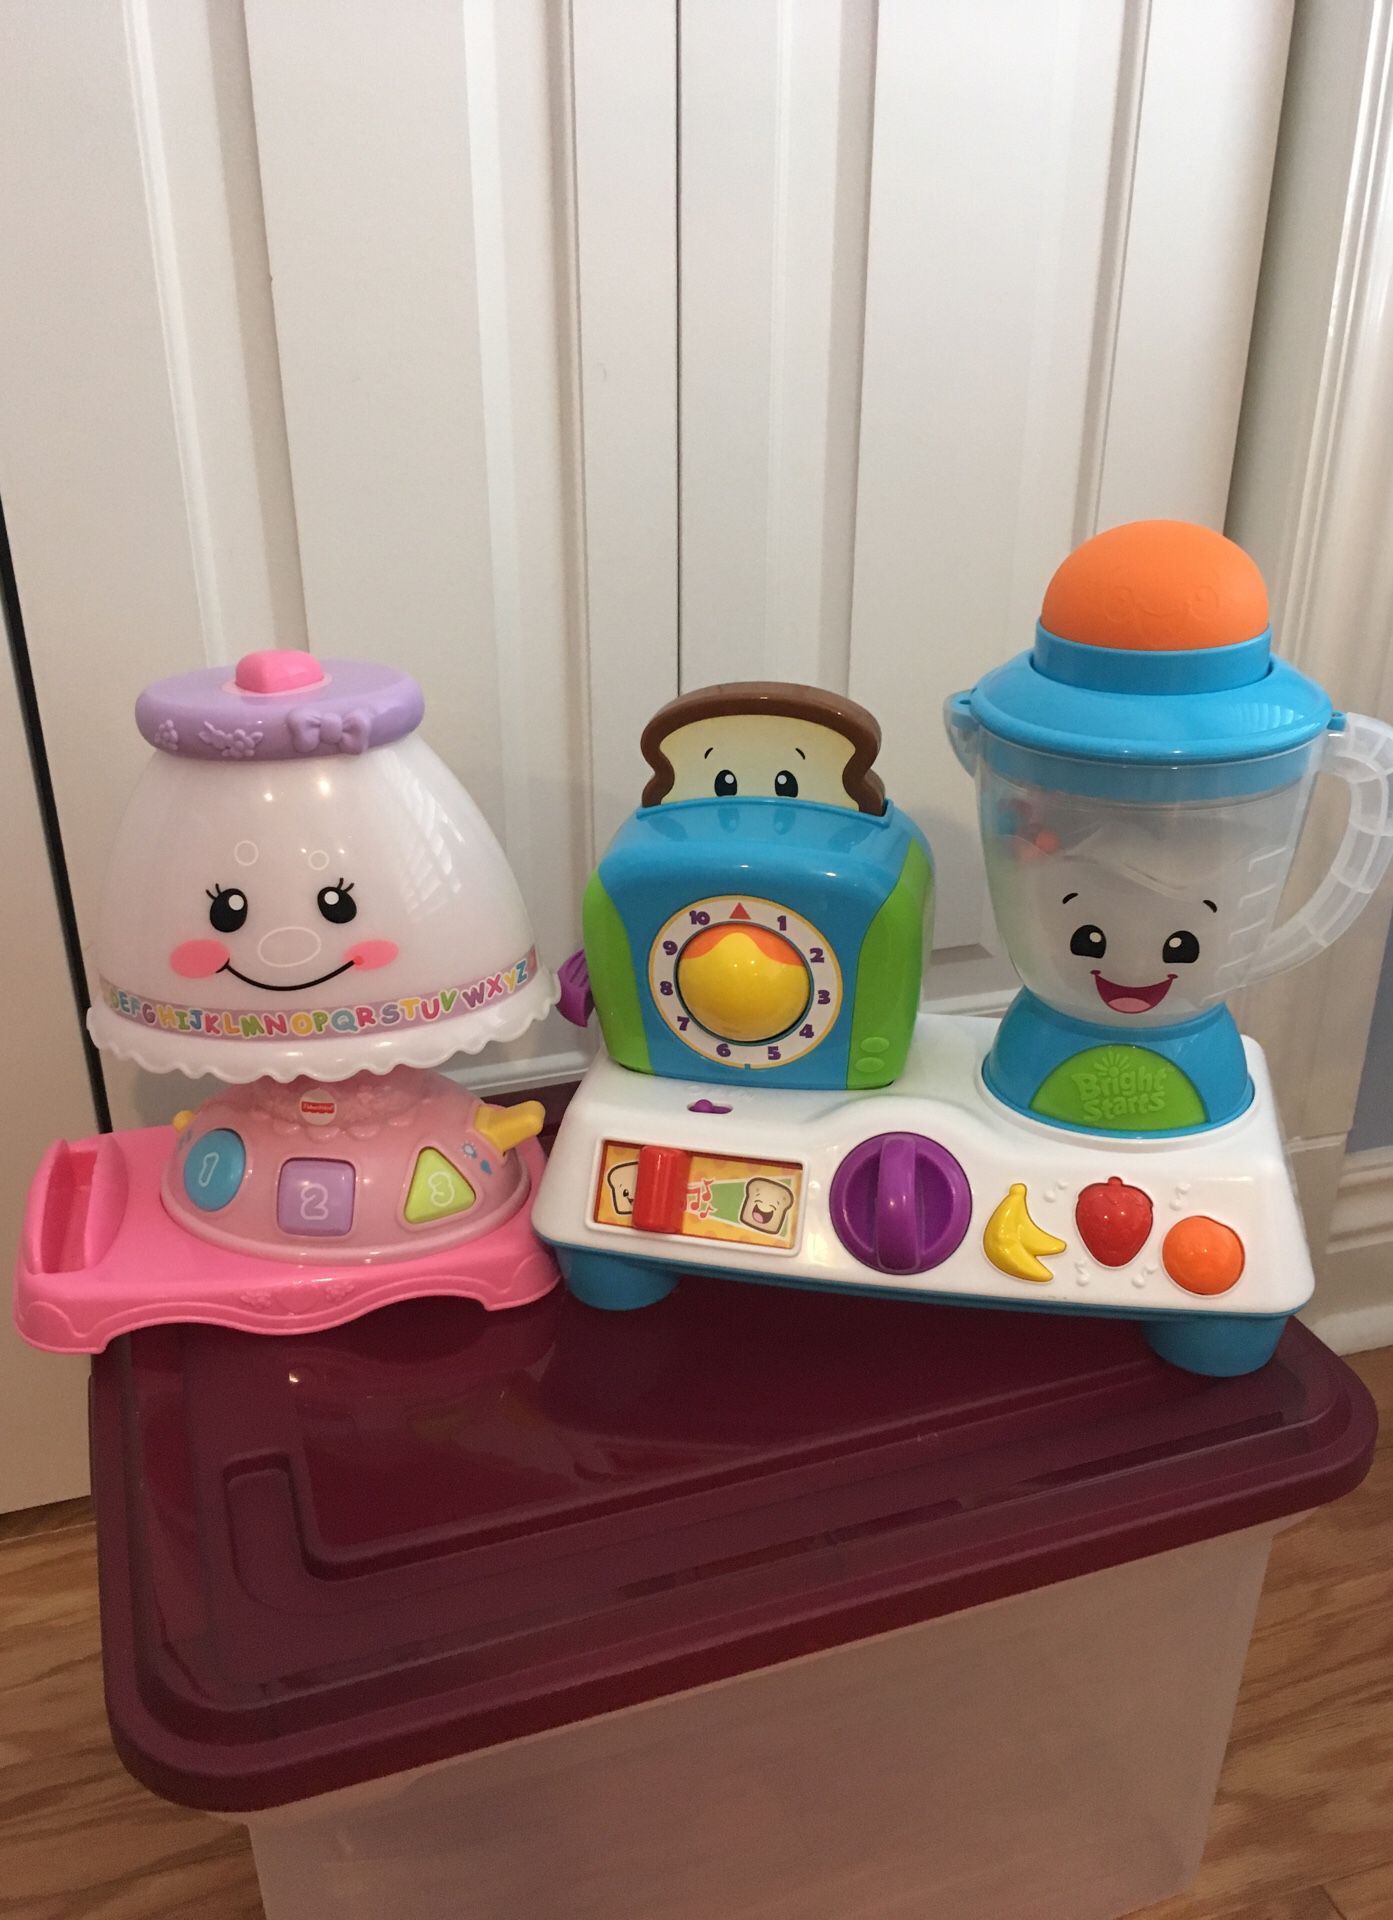 Baby toys like new